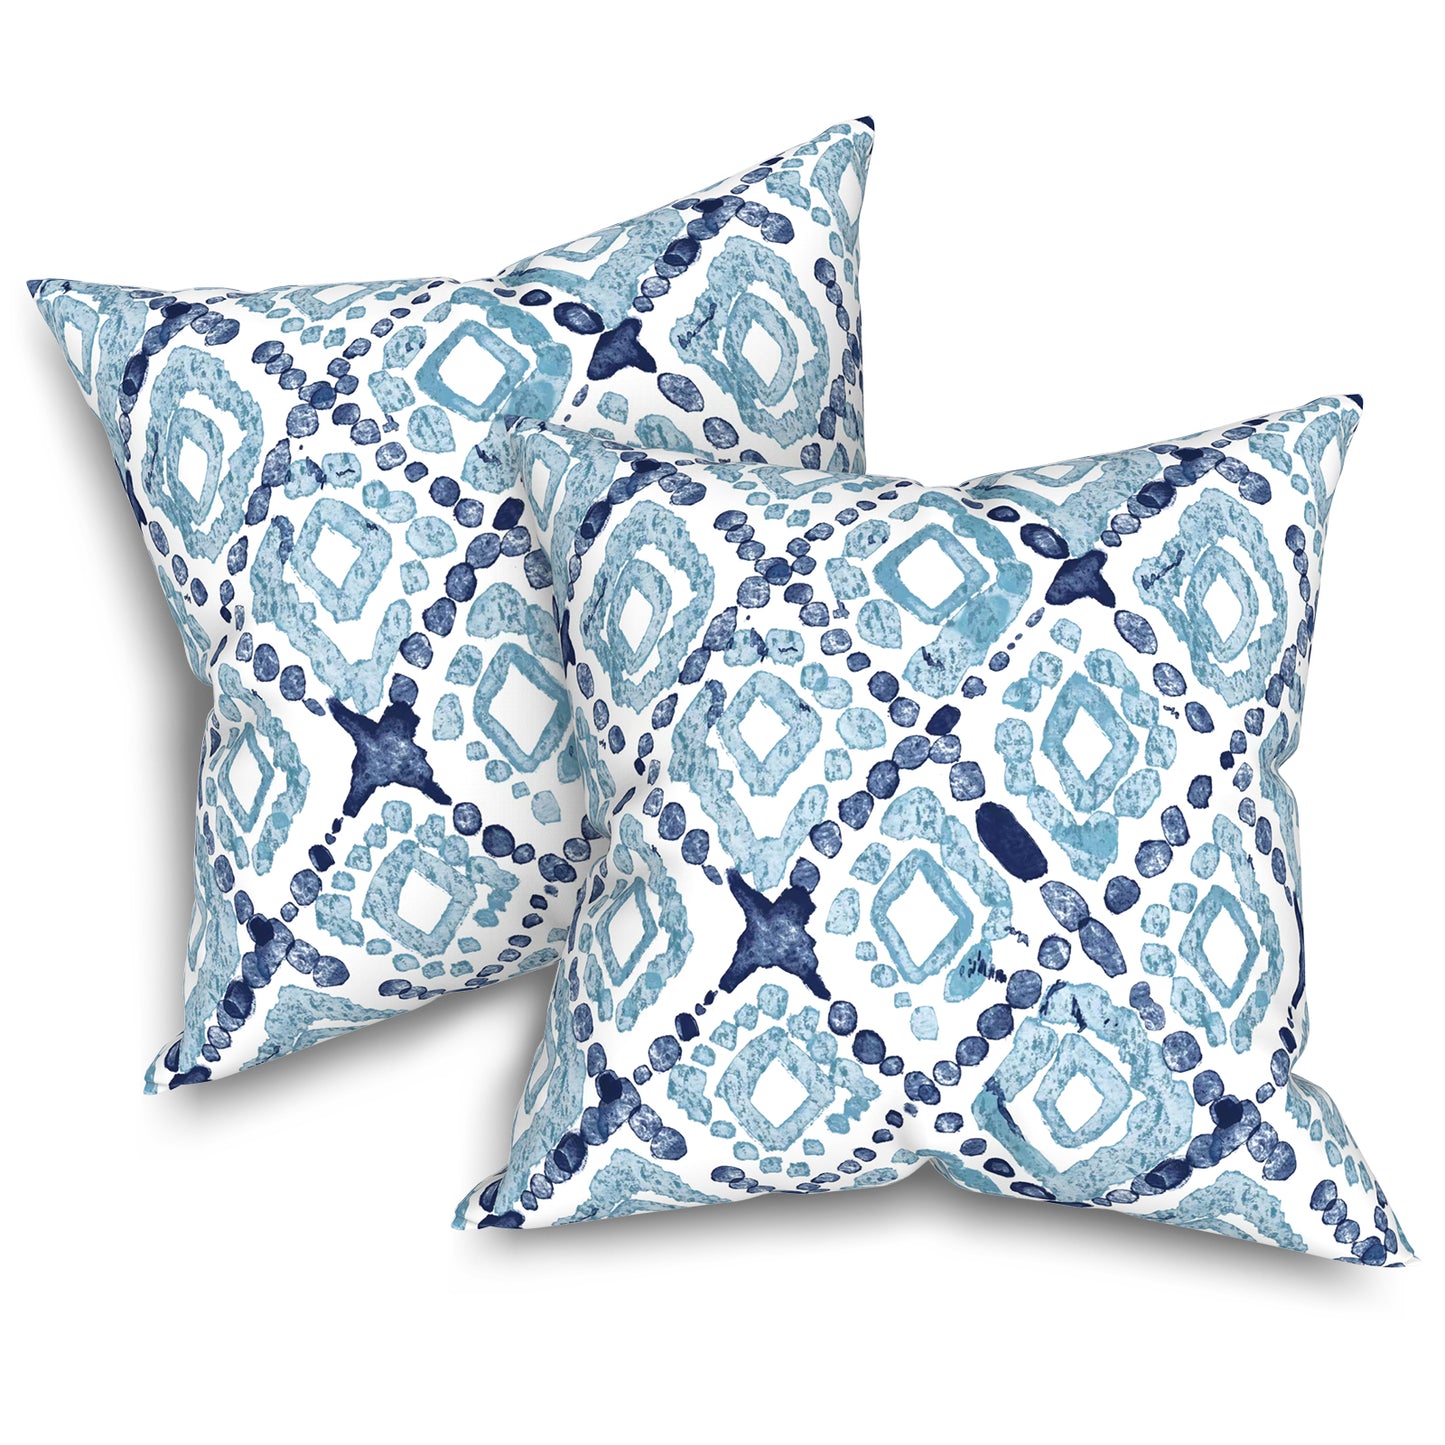 Melody Elephant Pack of 2 Patio Throw Pillow Covers ONLY, Water Repellent Cushion Cases 20x20 Inch, Square Pillowcases for Outdoor Couch Decoration, Boho Geometry Blue